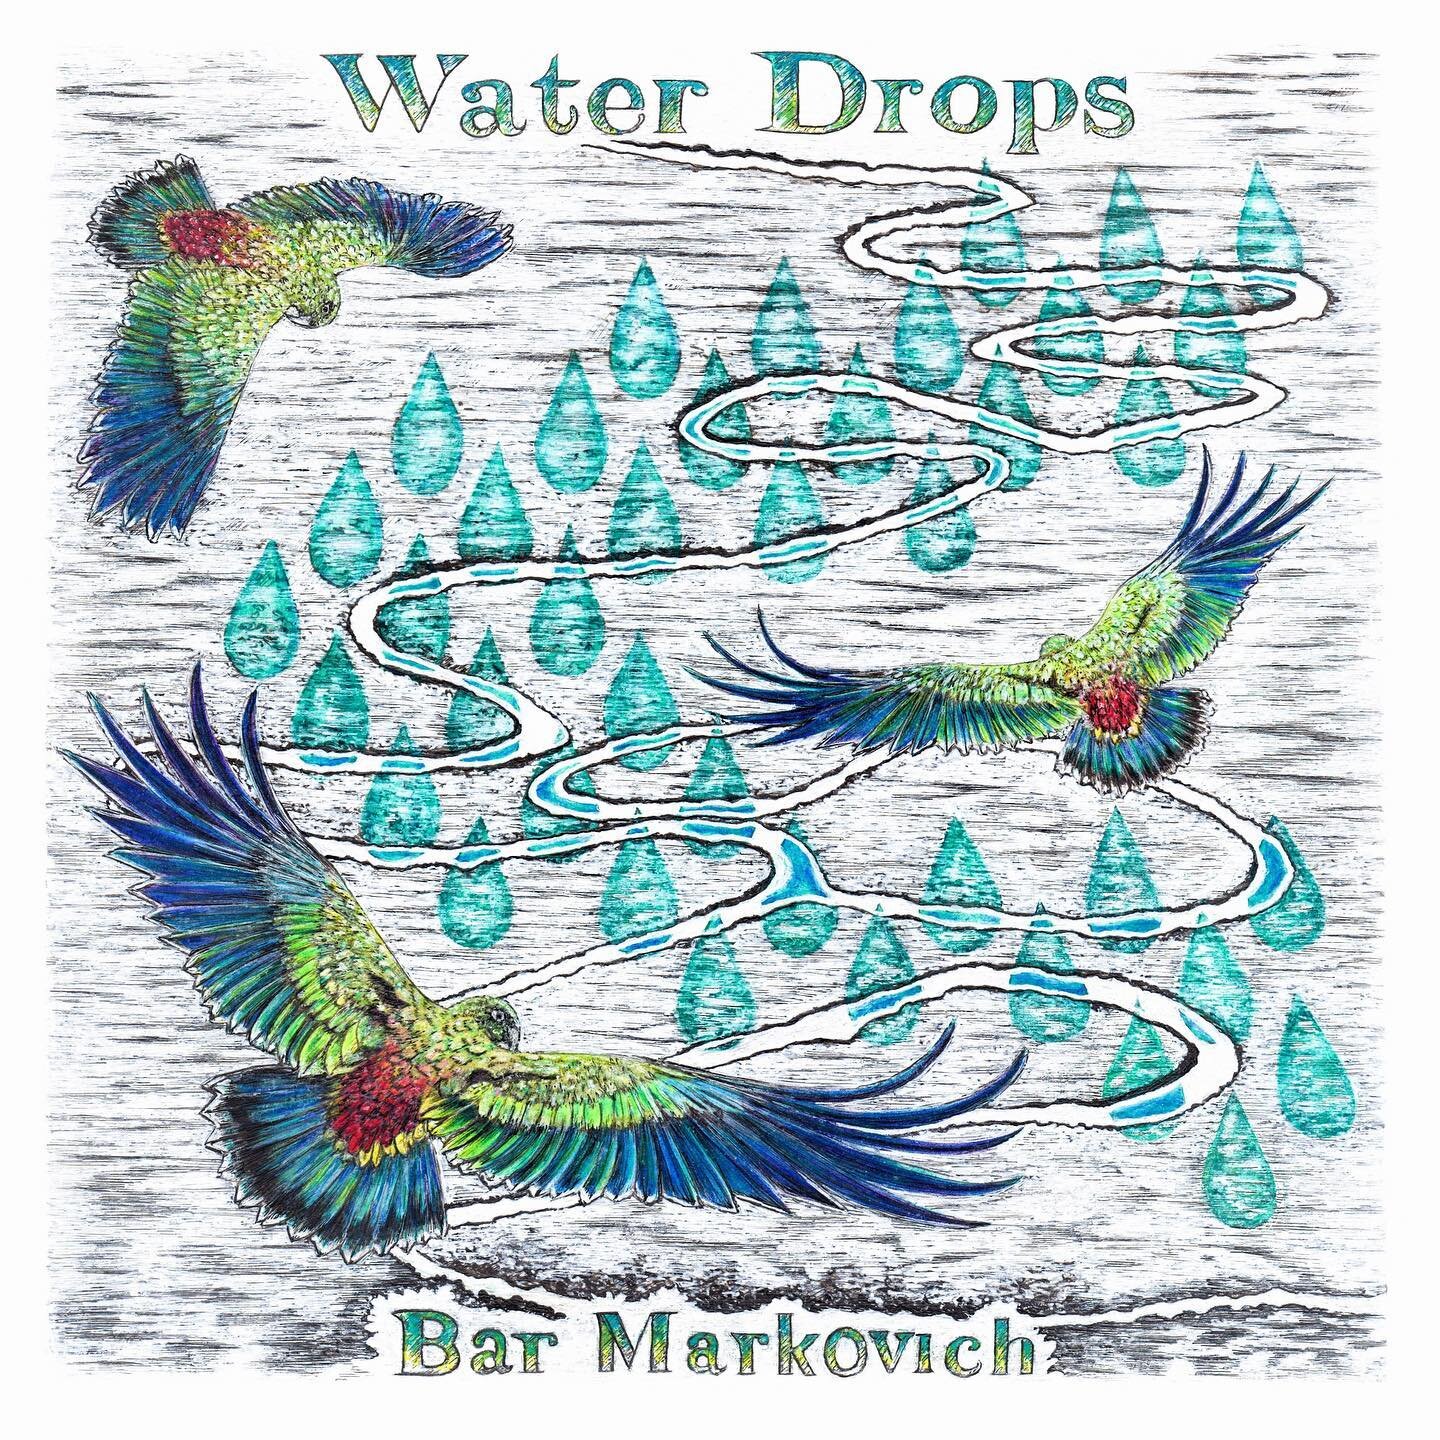 My new single &ldquo;Water Drops&rdquo; is OUT now and available on all the major music platforms in the world!
Link in my BIO.
💿💦🎵🌍
.
Few words about the single&rsquo;s artwork by the artist behind it - Jan Hill, aka @sketchesfromatinypencil :

